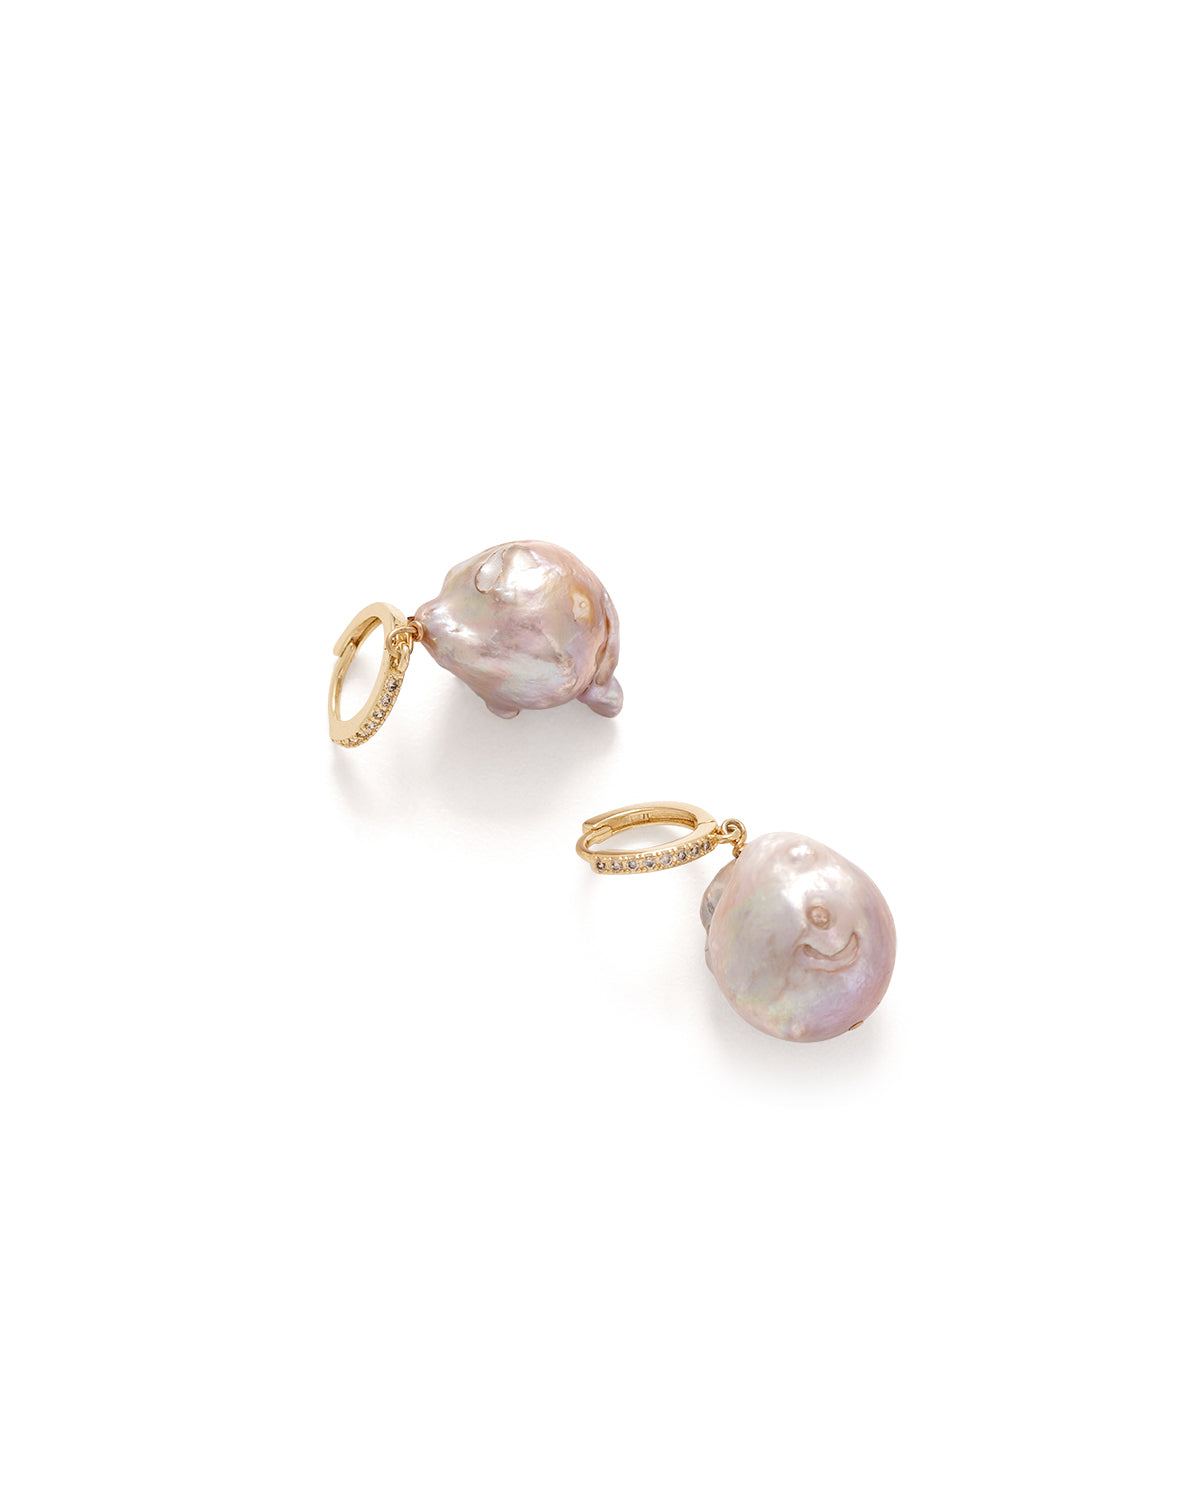 16-17mm Colored Baroque Freshwater Pearl Earrings